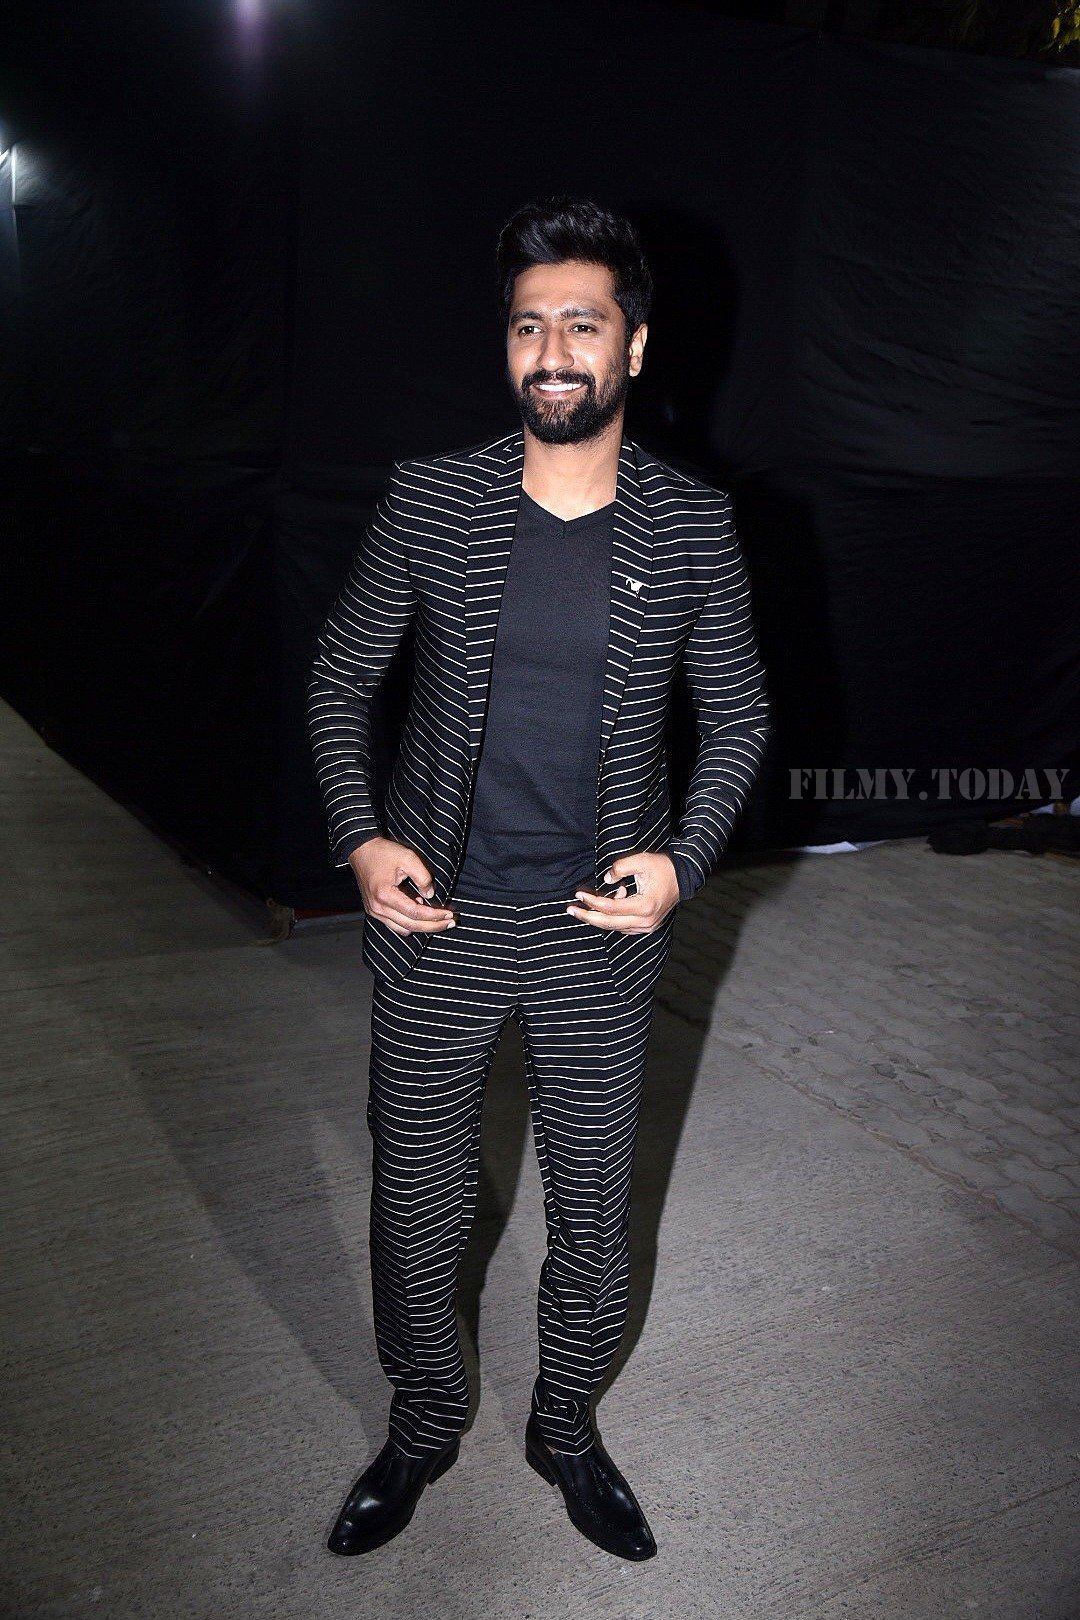 Photos: Vicky Kaushal At Times Fresh Face Grand Finale | Picture 1633133